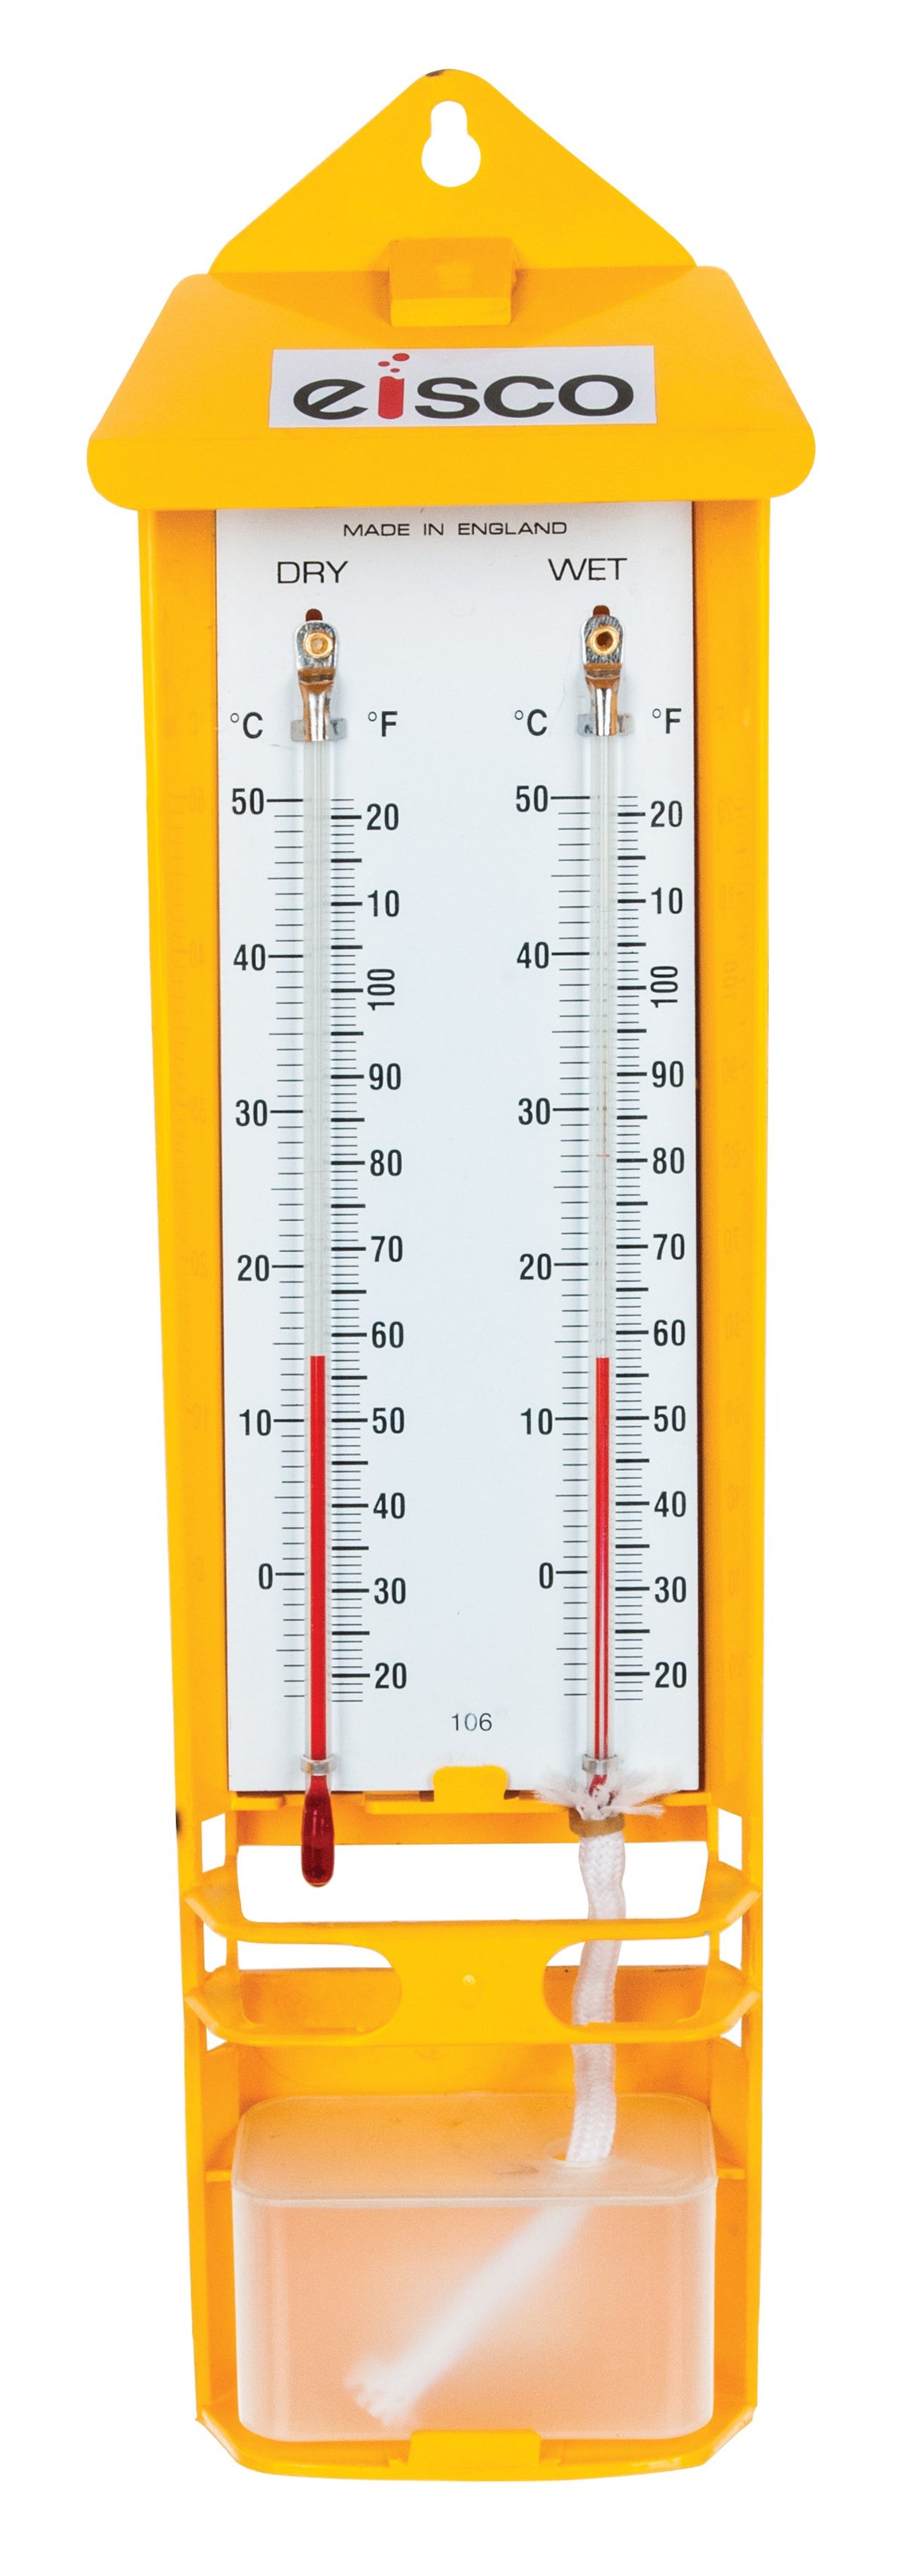 Large Wall Thermometer in Plastic Red Alcohol - Dual Scale